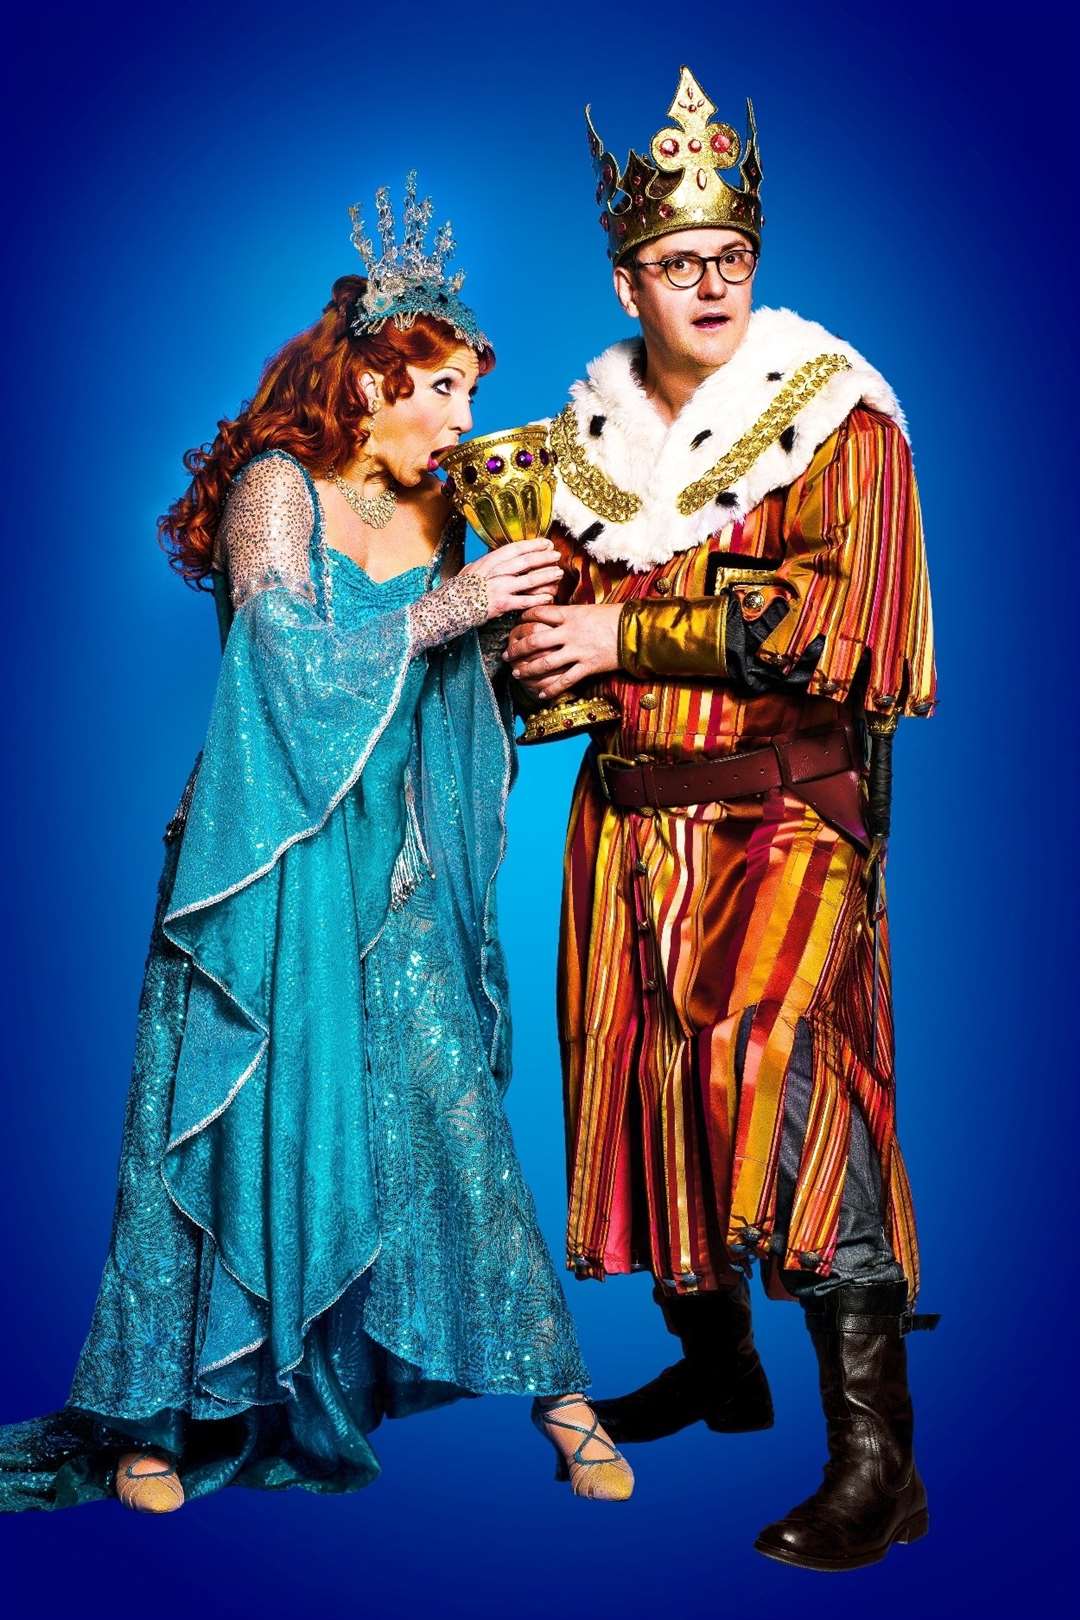 Joe Pasquale with Bonnie Langford when he was in Spamalot - which also comes to the Orchard Theatre this year